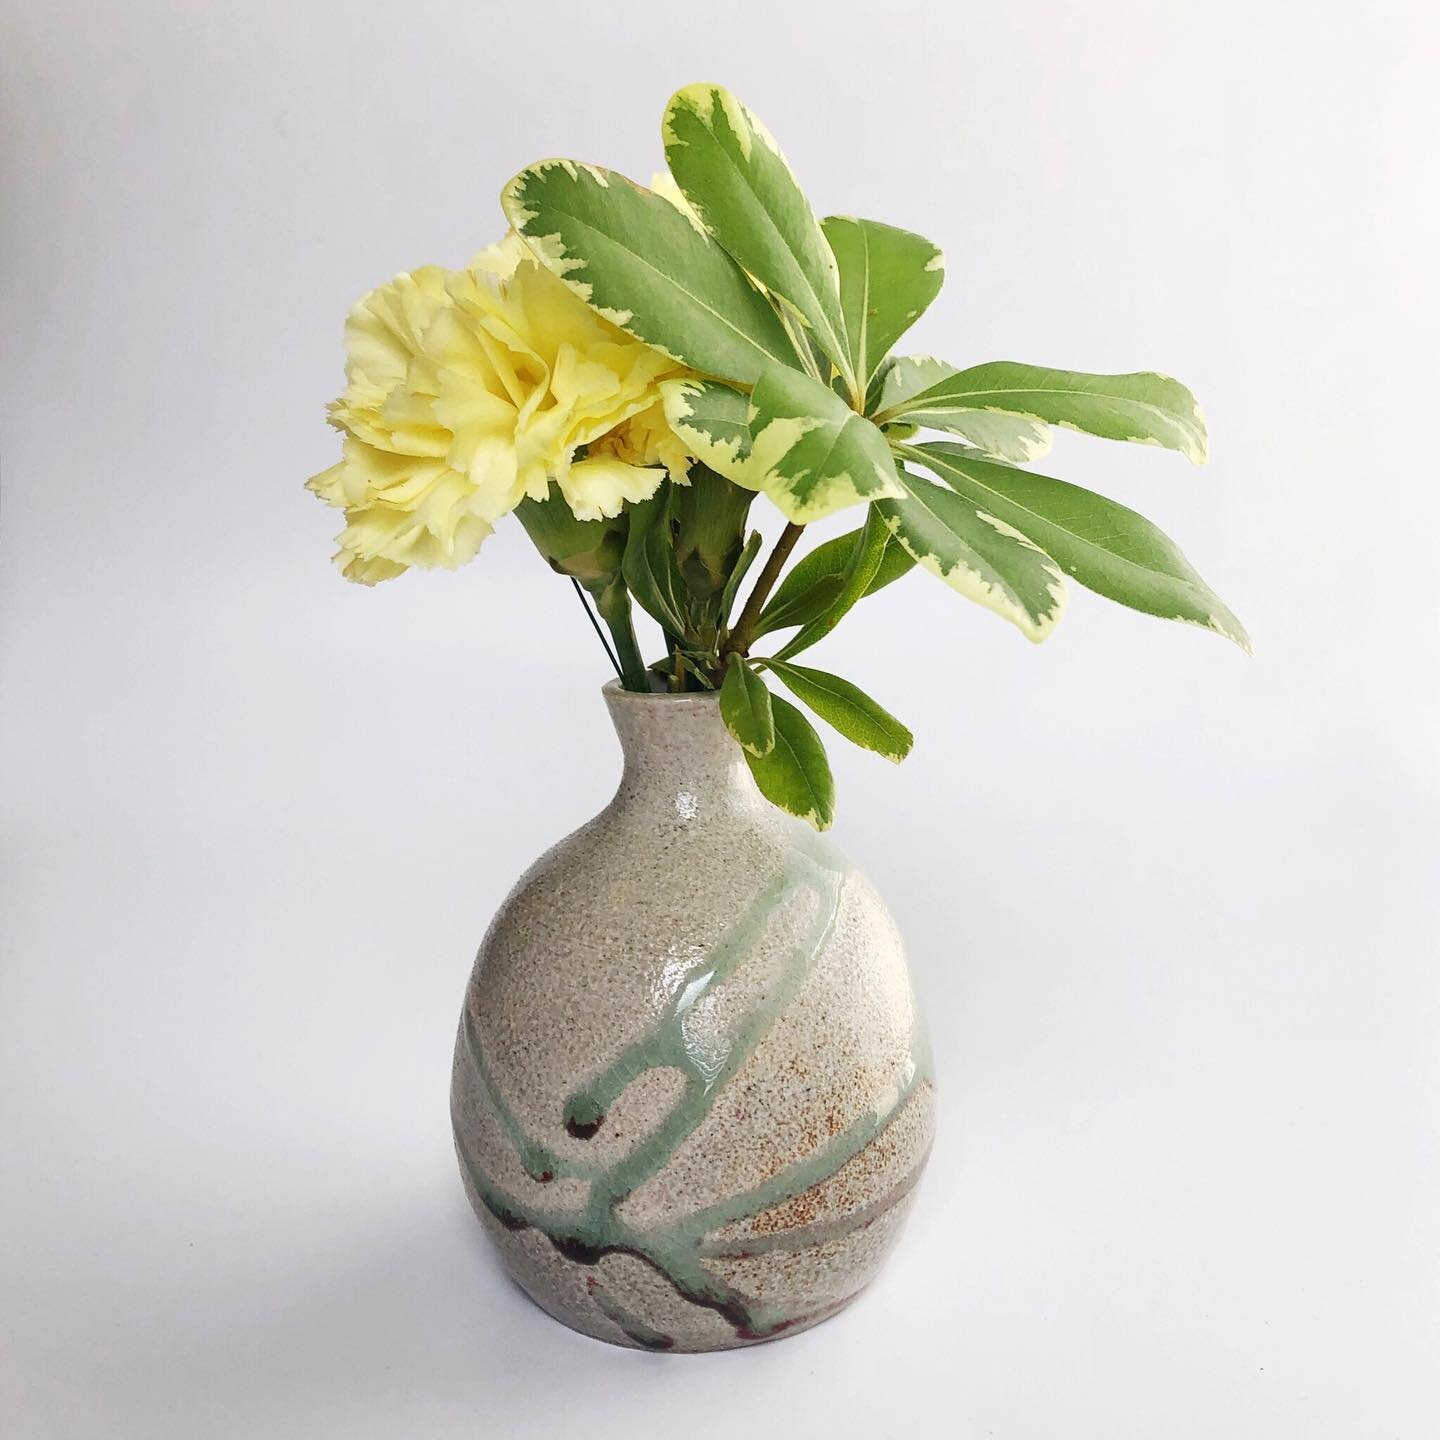 Happy Wednesday! Fresh flowers in this soda fired bud vase✨
I&rsquo;ve been working on making a new website where you&rsquo;ll be able to purchase my pieces. In the meantime, if you see anything you&rsquo;re interested in, send me a DM🌿
.
.
.
.
.
.
